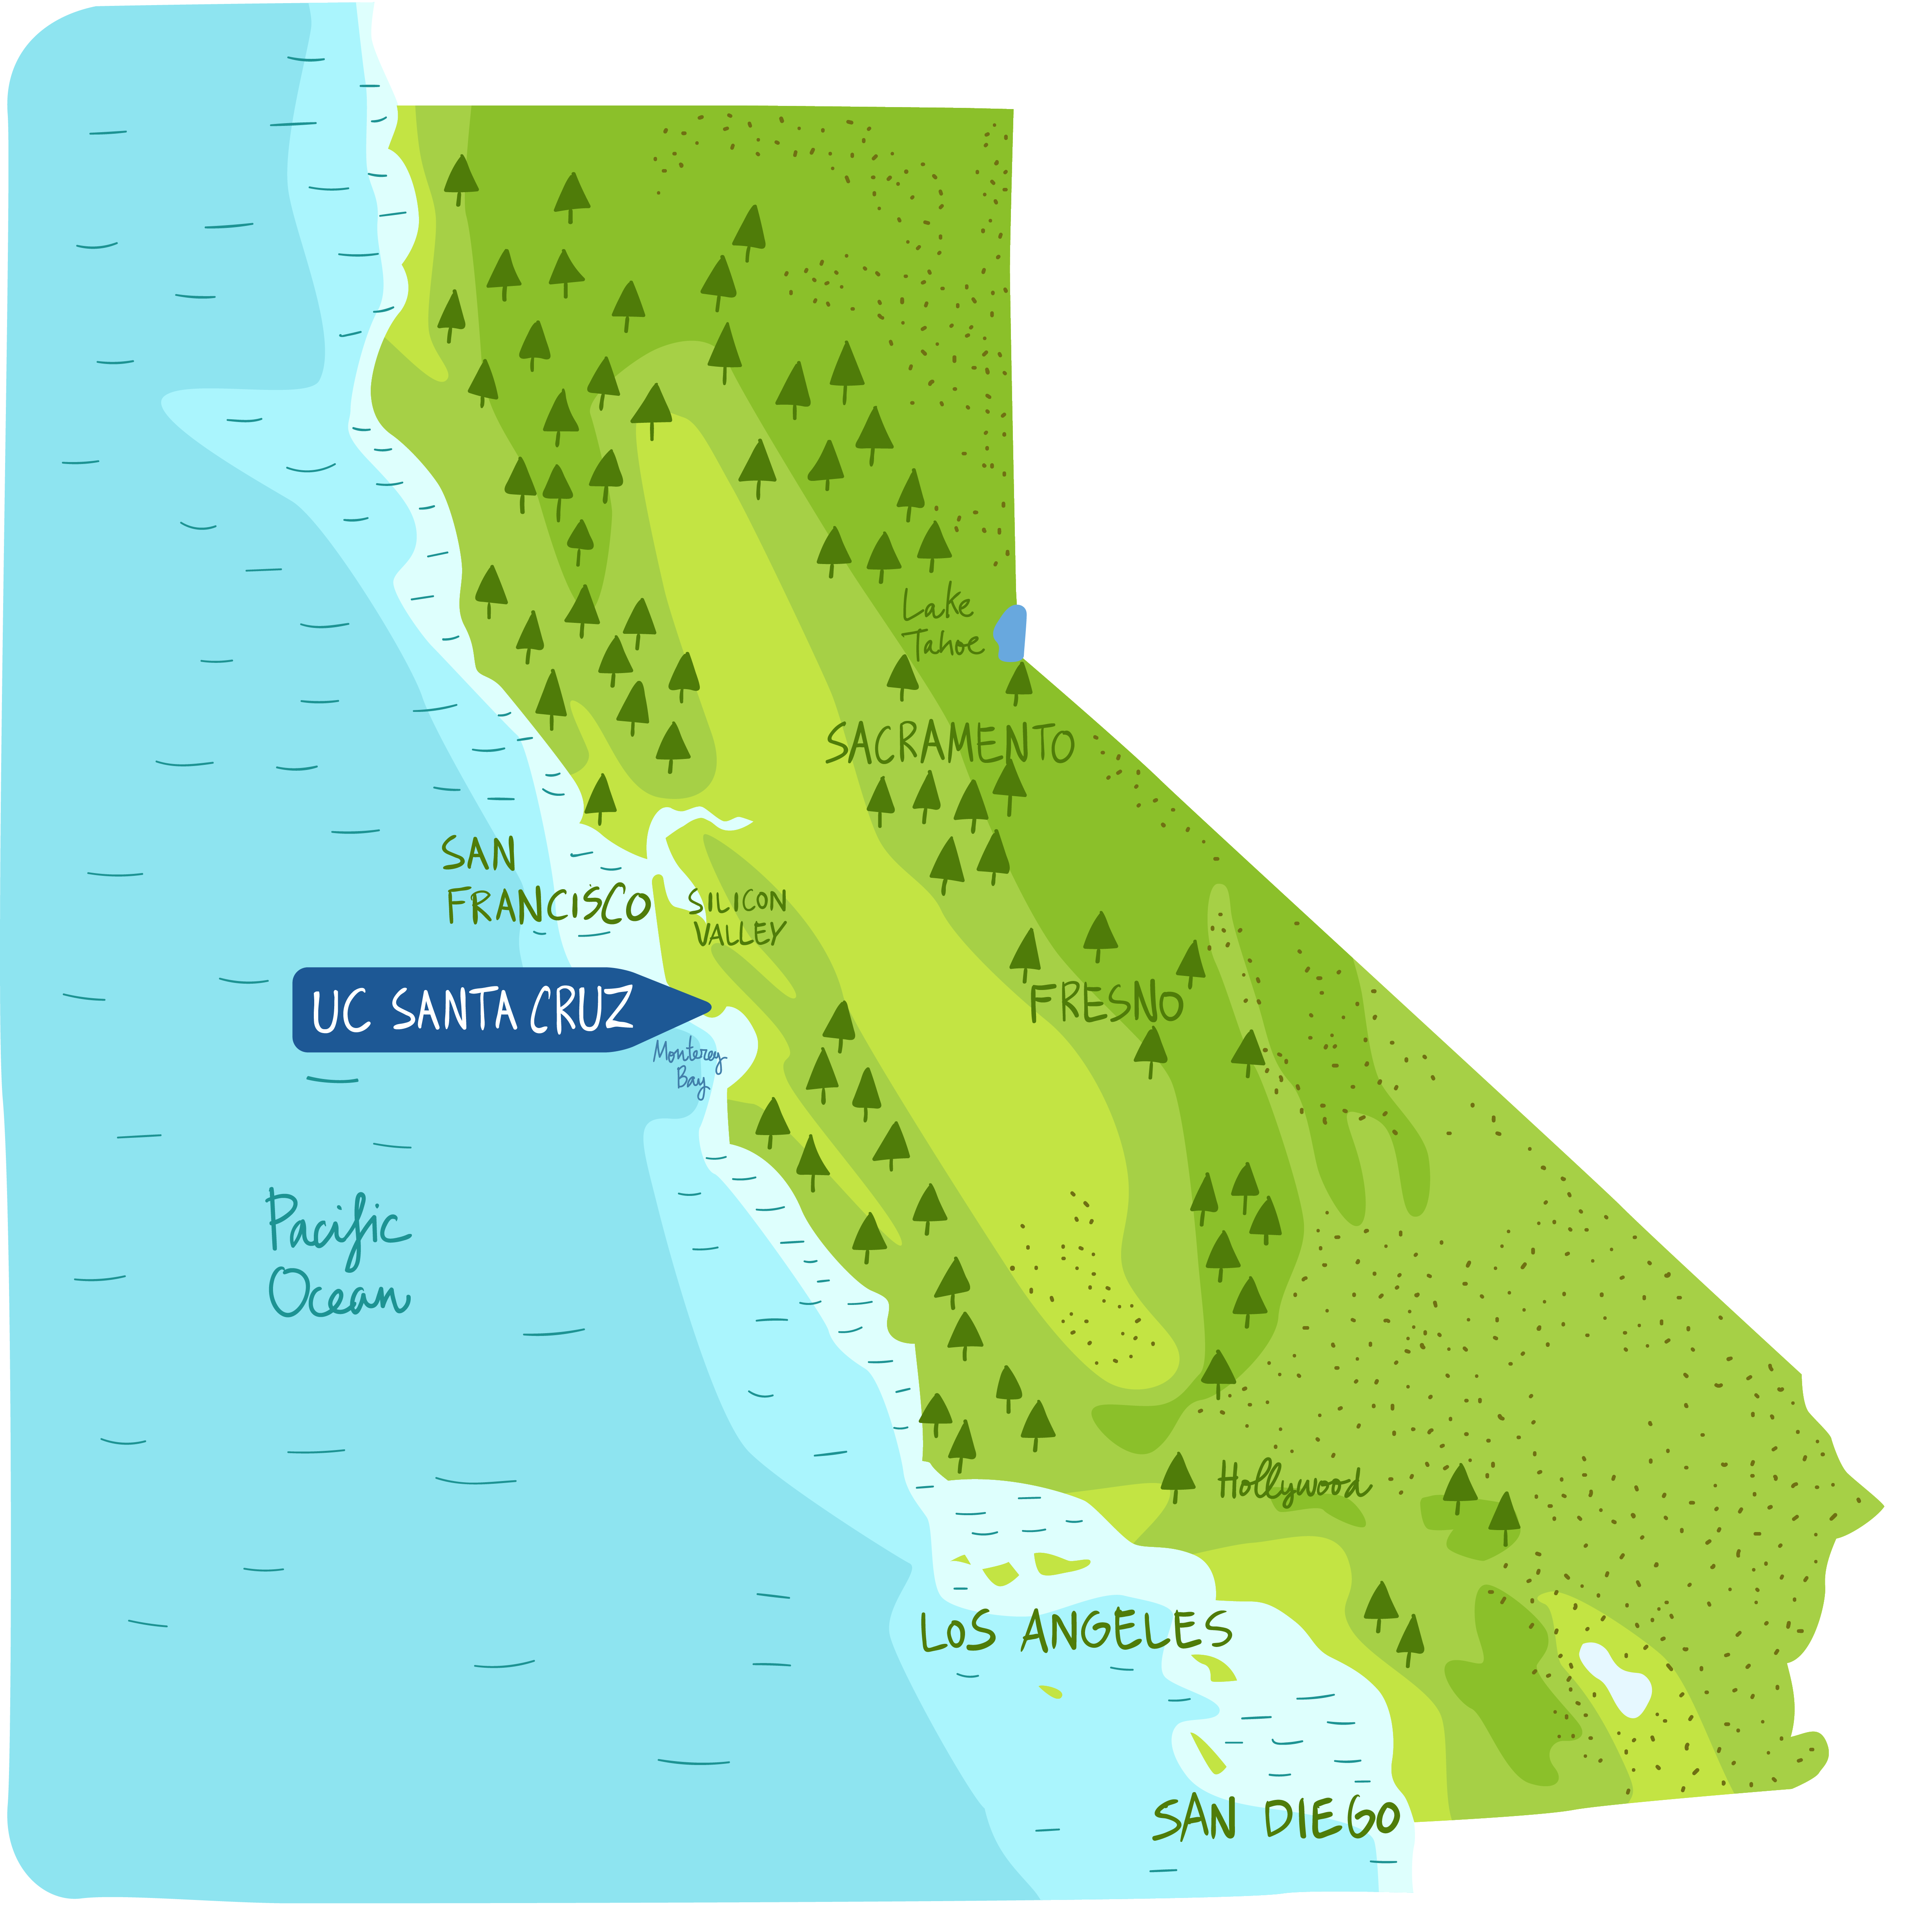 Illustration of the state of California with key cities and UC ɬֱ Cruz called out.